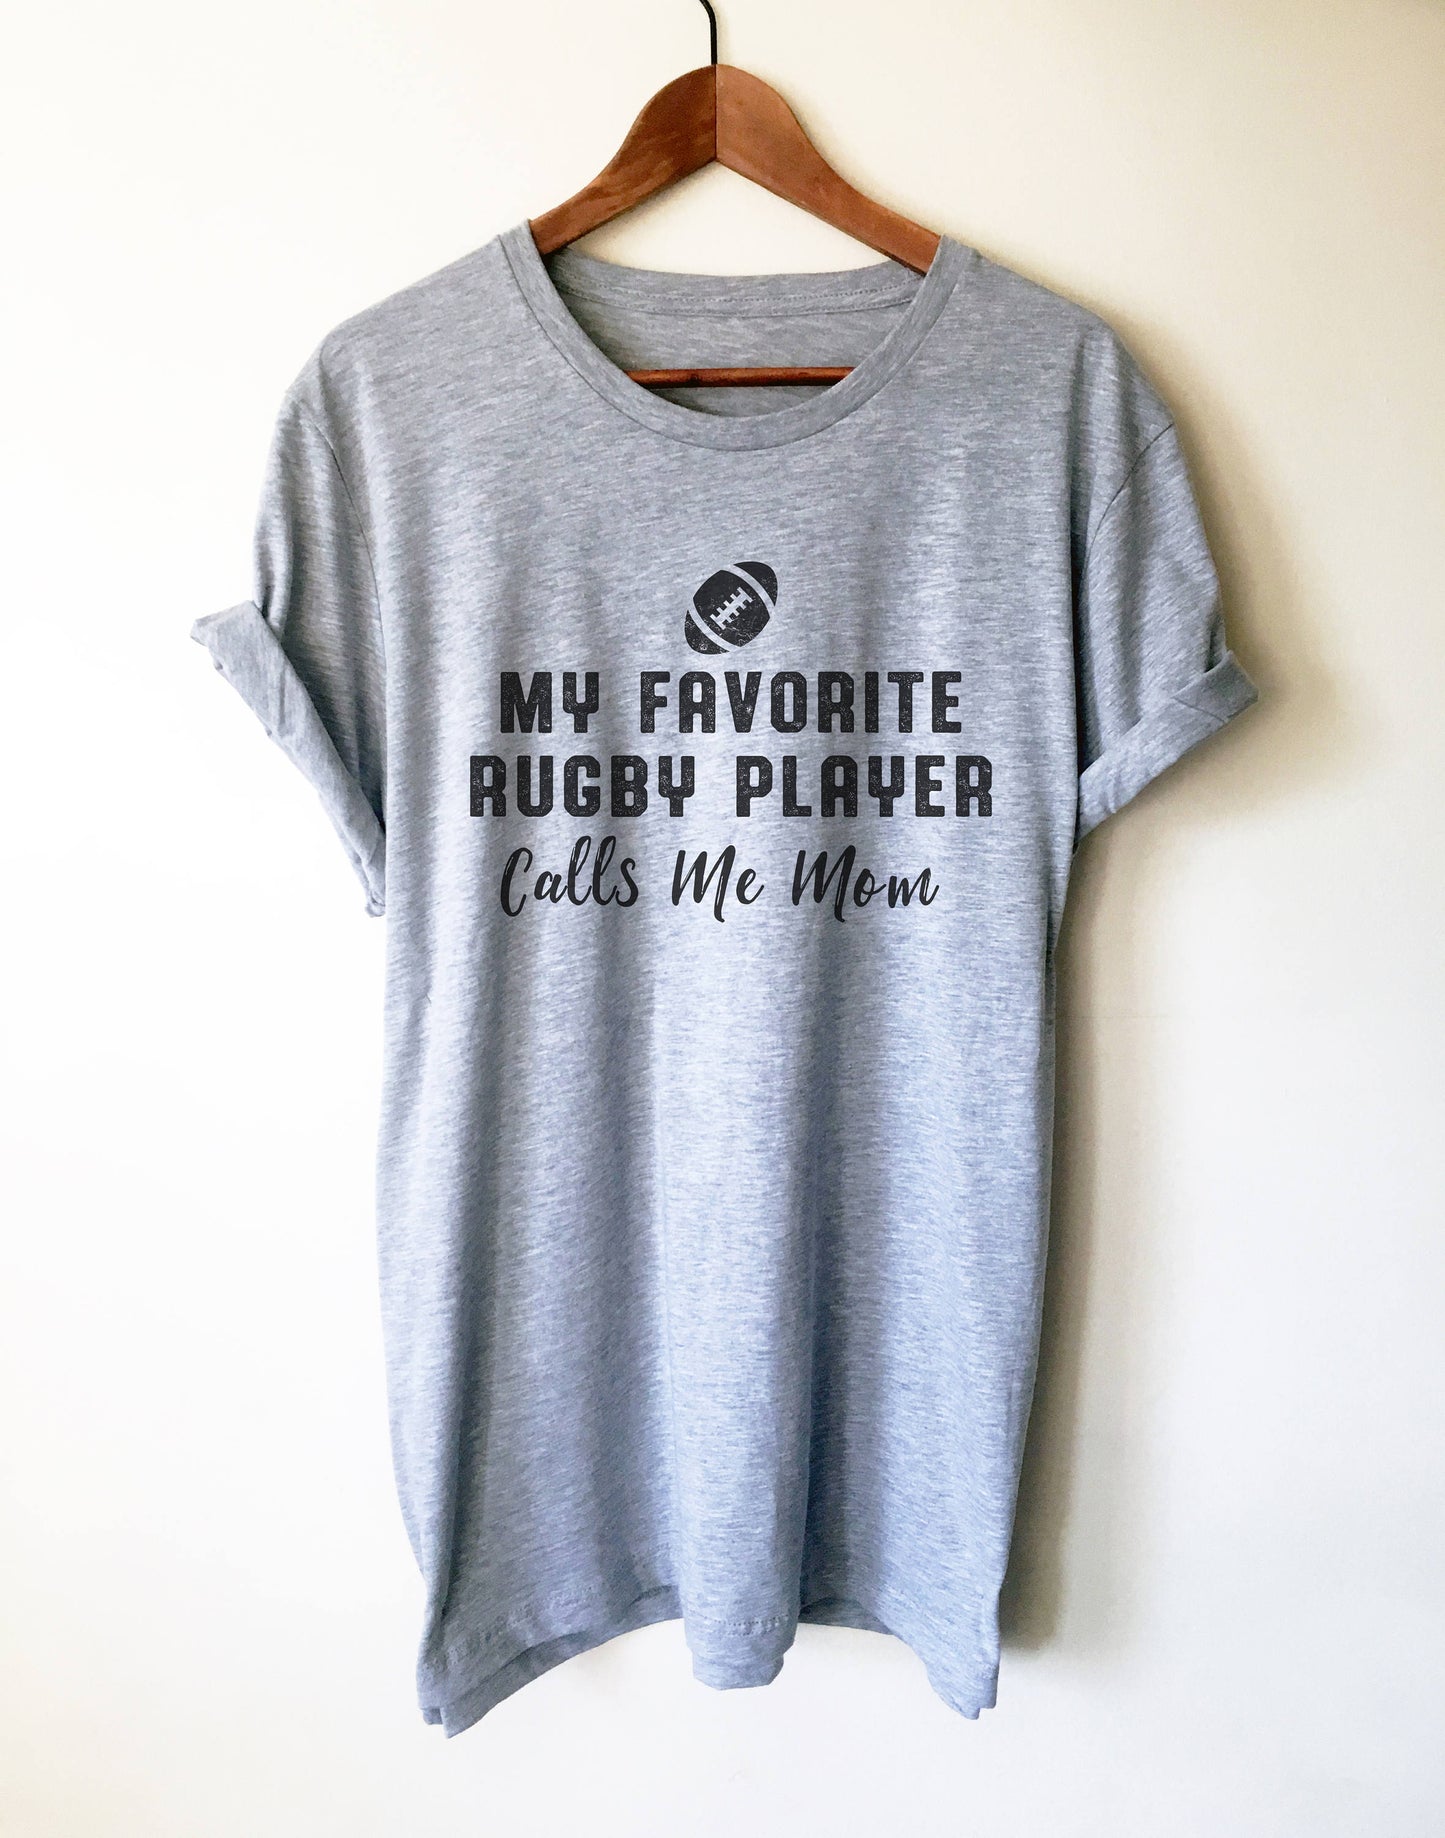 My Favorite Rugby Player Calls Me Mom Unisex Shirt - Rugby Shirt, Rugby Gifts, Rugby League, Rugby Player, Rugby Team, Rugby Mom